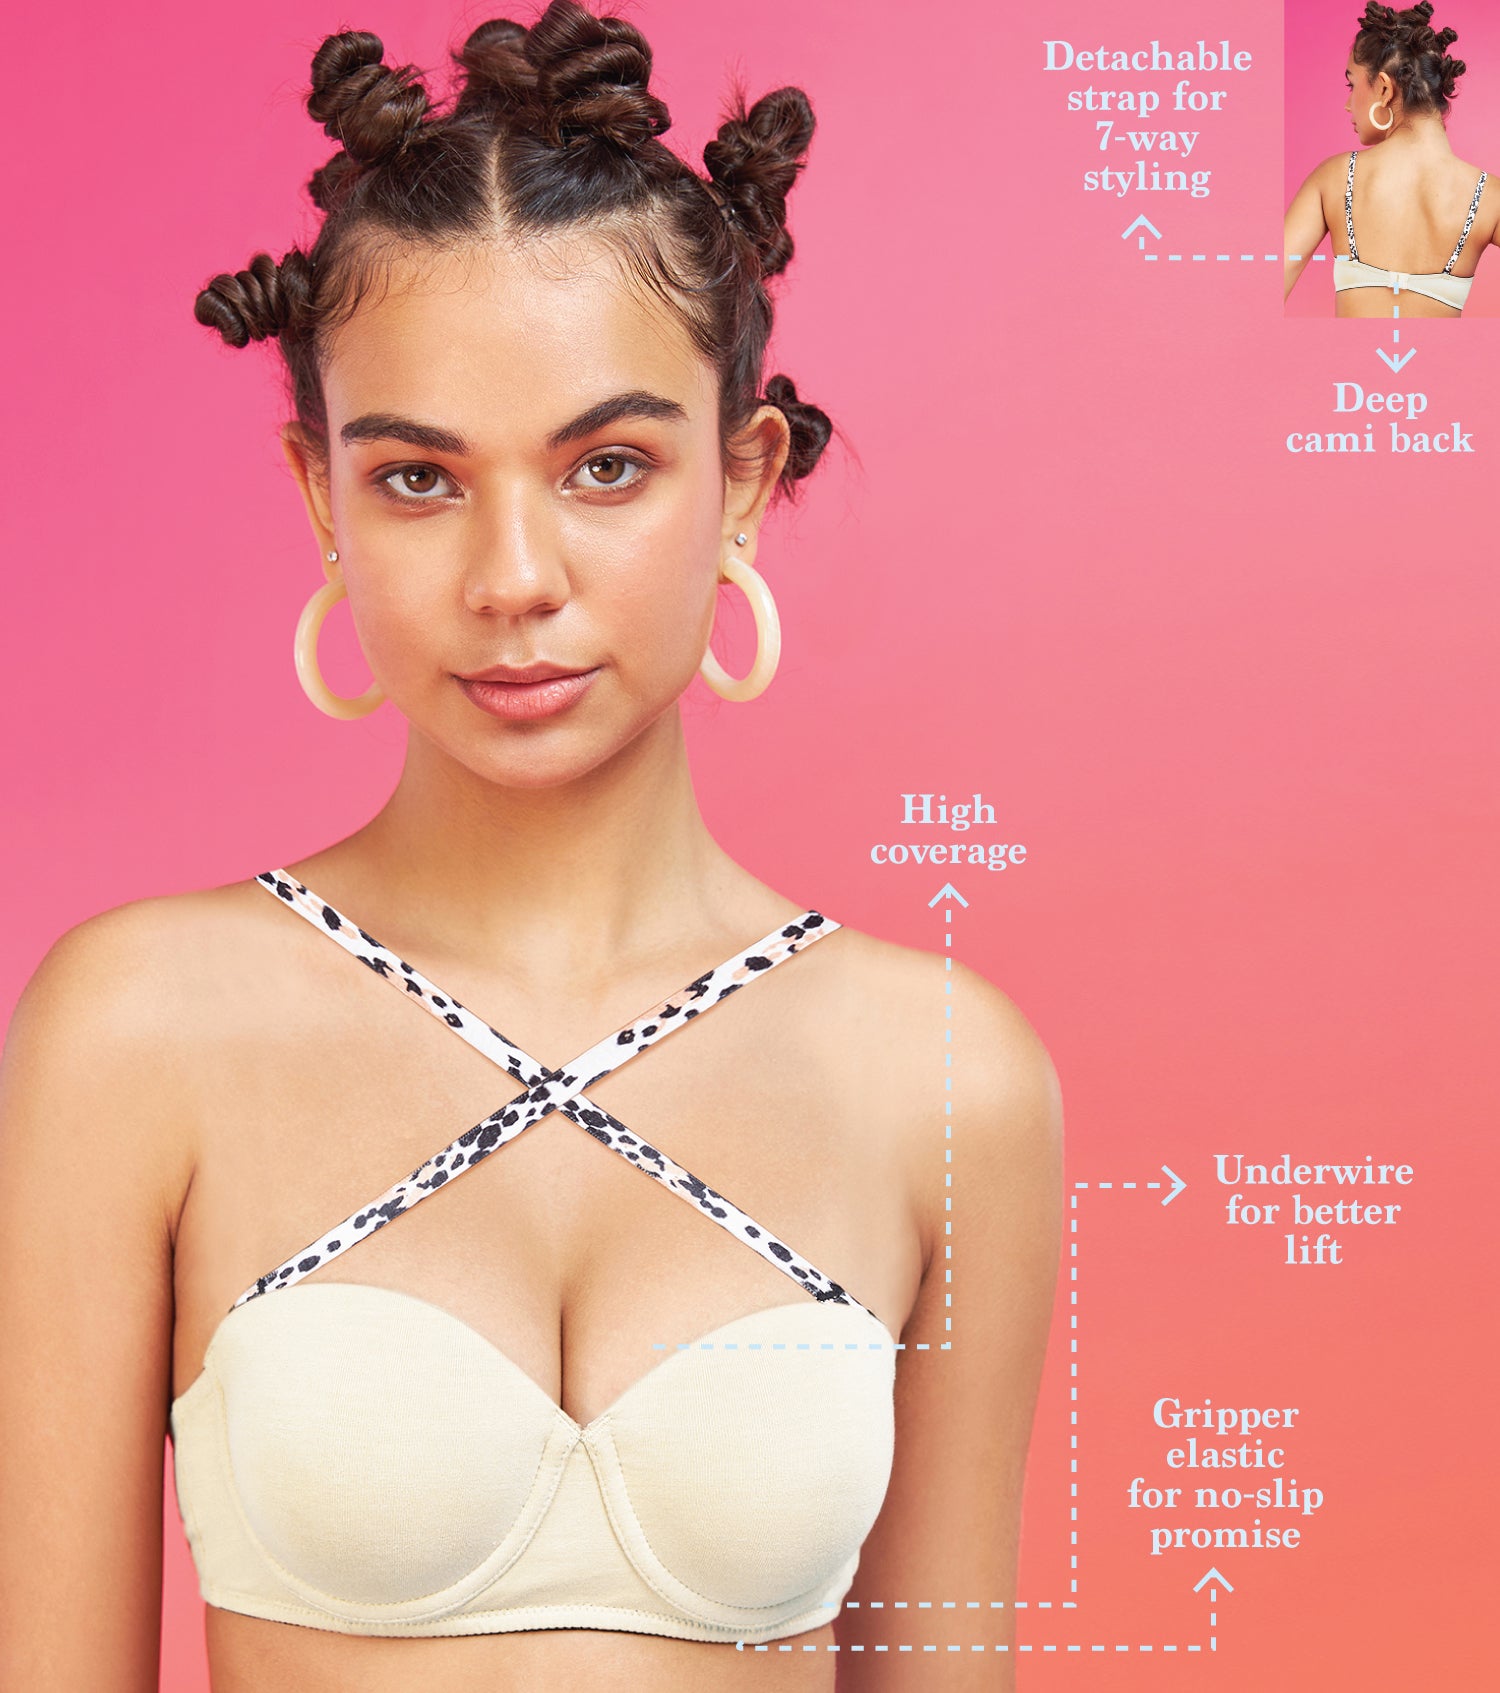 The Low Back Strapless: Toasted Almond